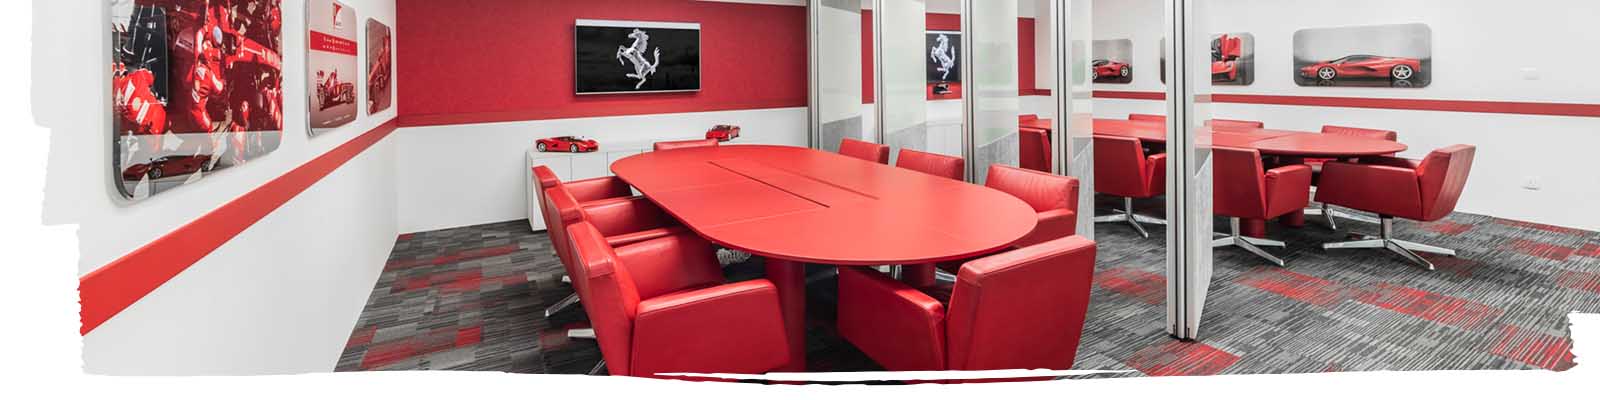 Ferrari icon style and design of office workplace